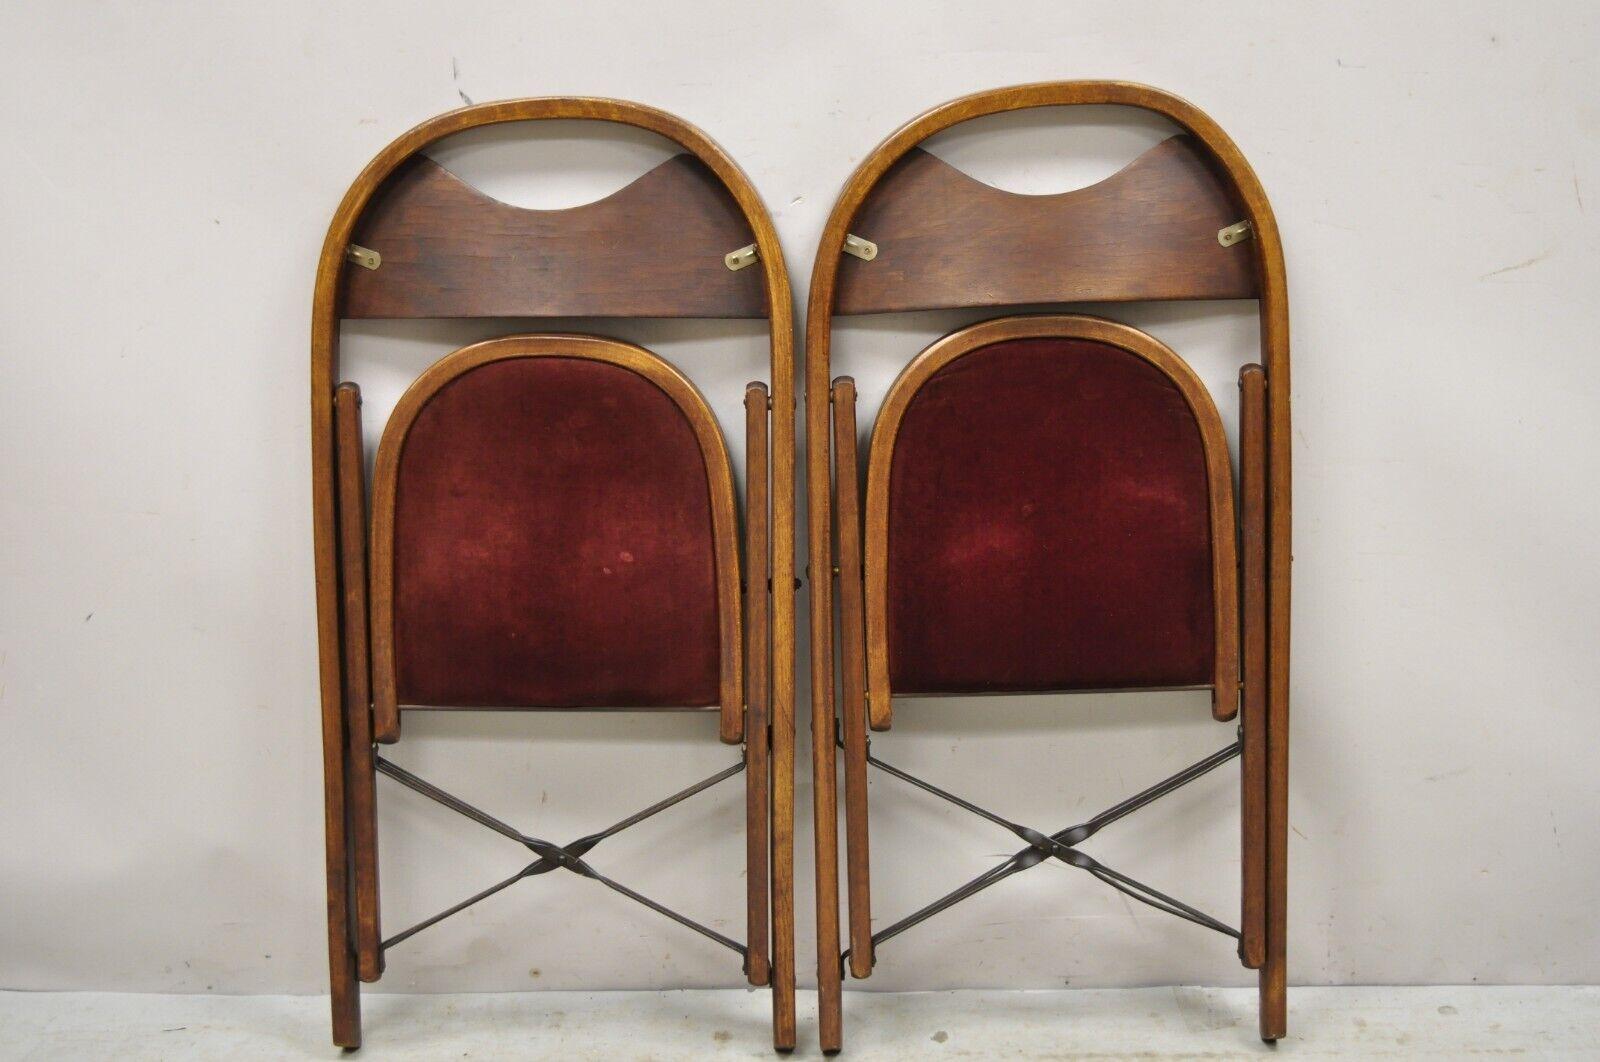 Vintage Art Deco Wooden Theatre Folding Chairs by General Sales Co Set of 6 'A' In Good Condition For Sale In Philadelphia, PA